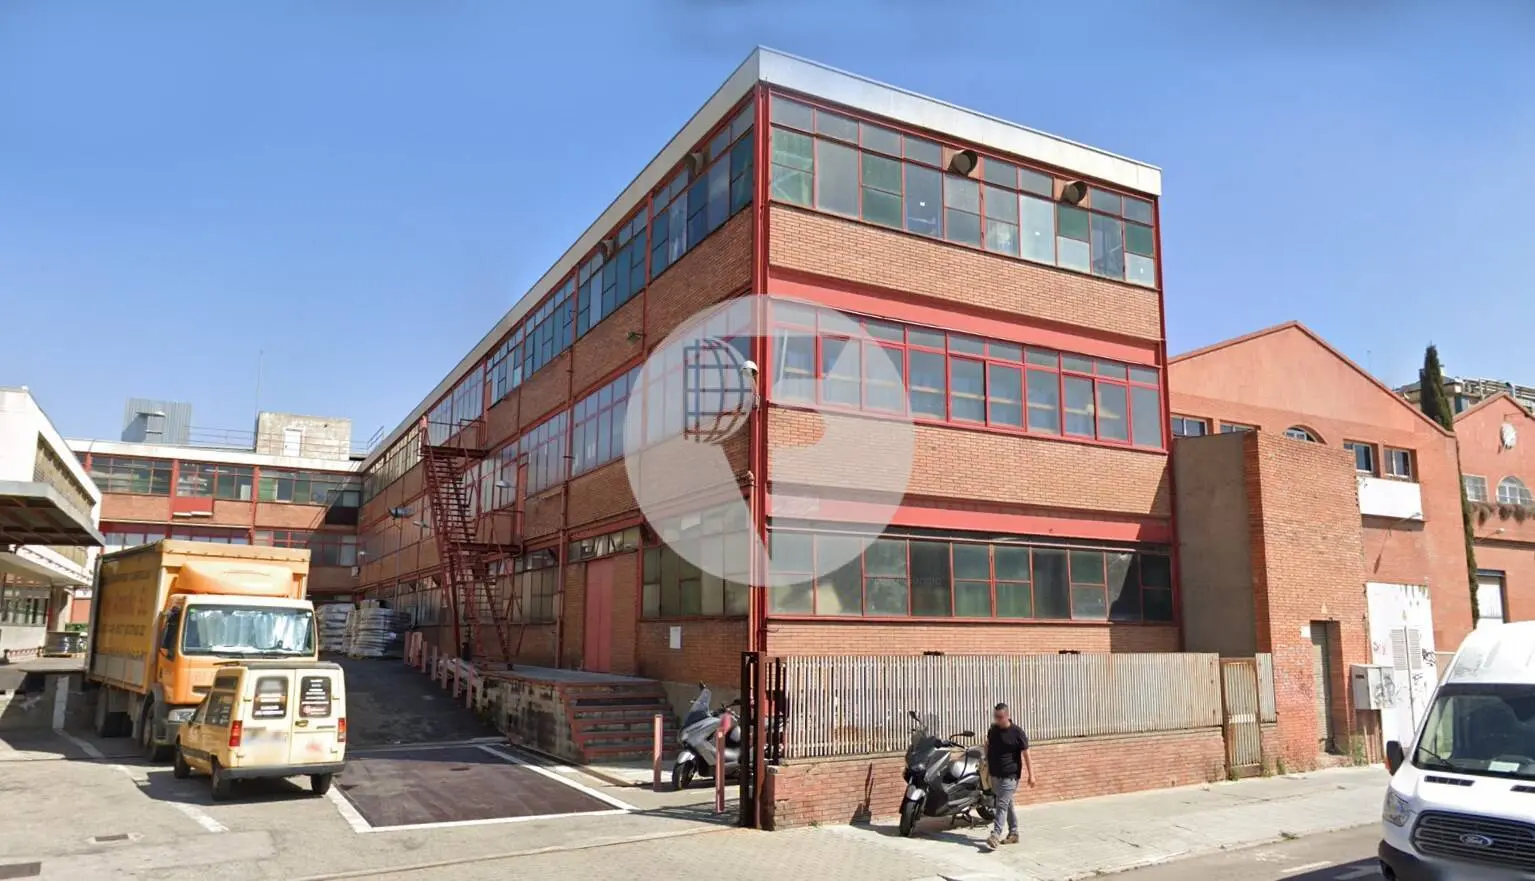 Industrial warehouse for sale or rent of 3,002 - Carabanchel, Madrid. 